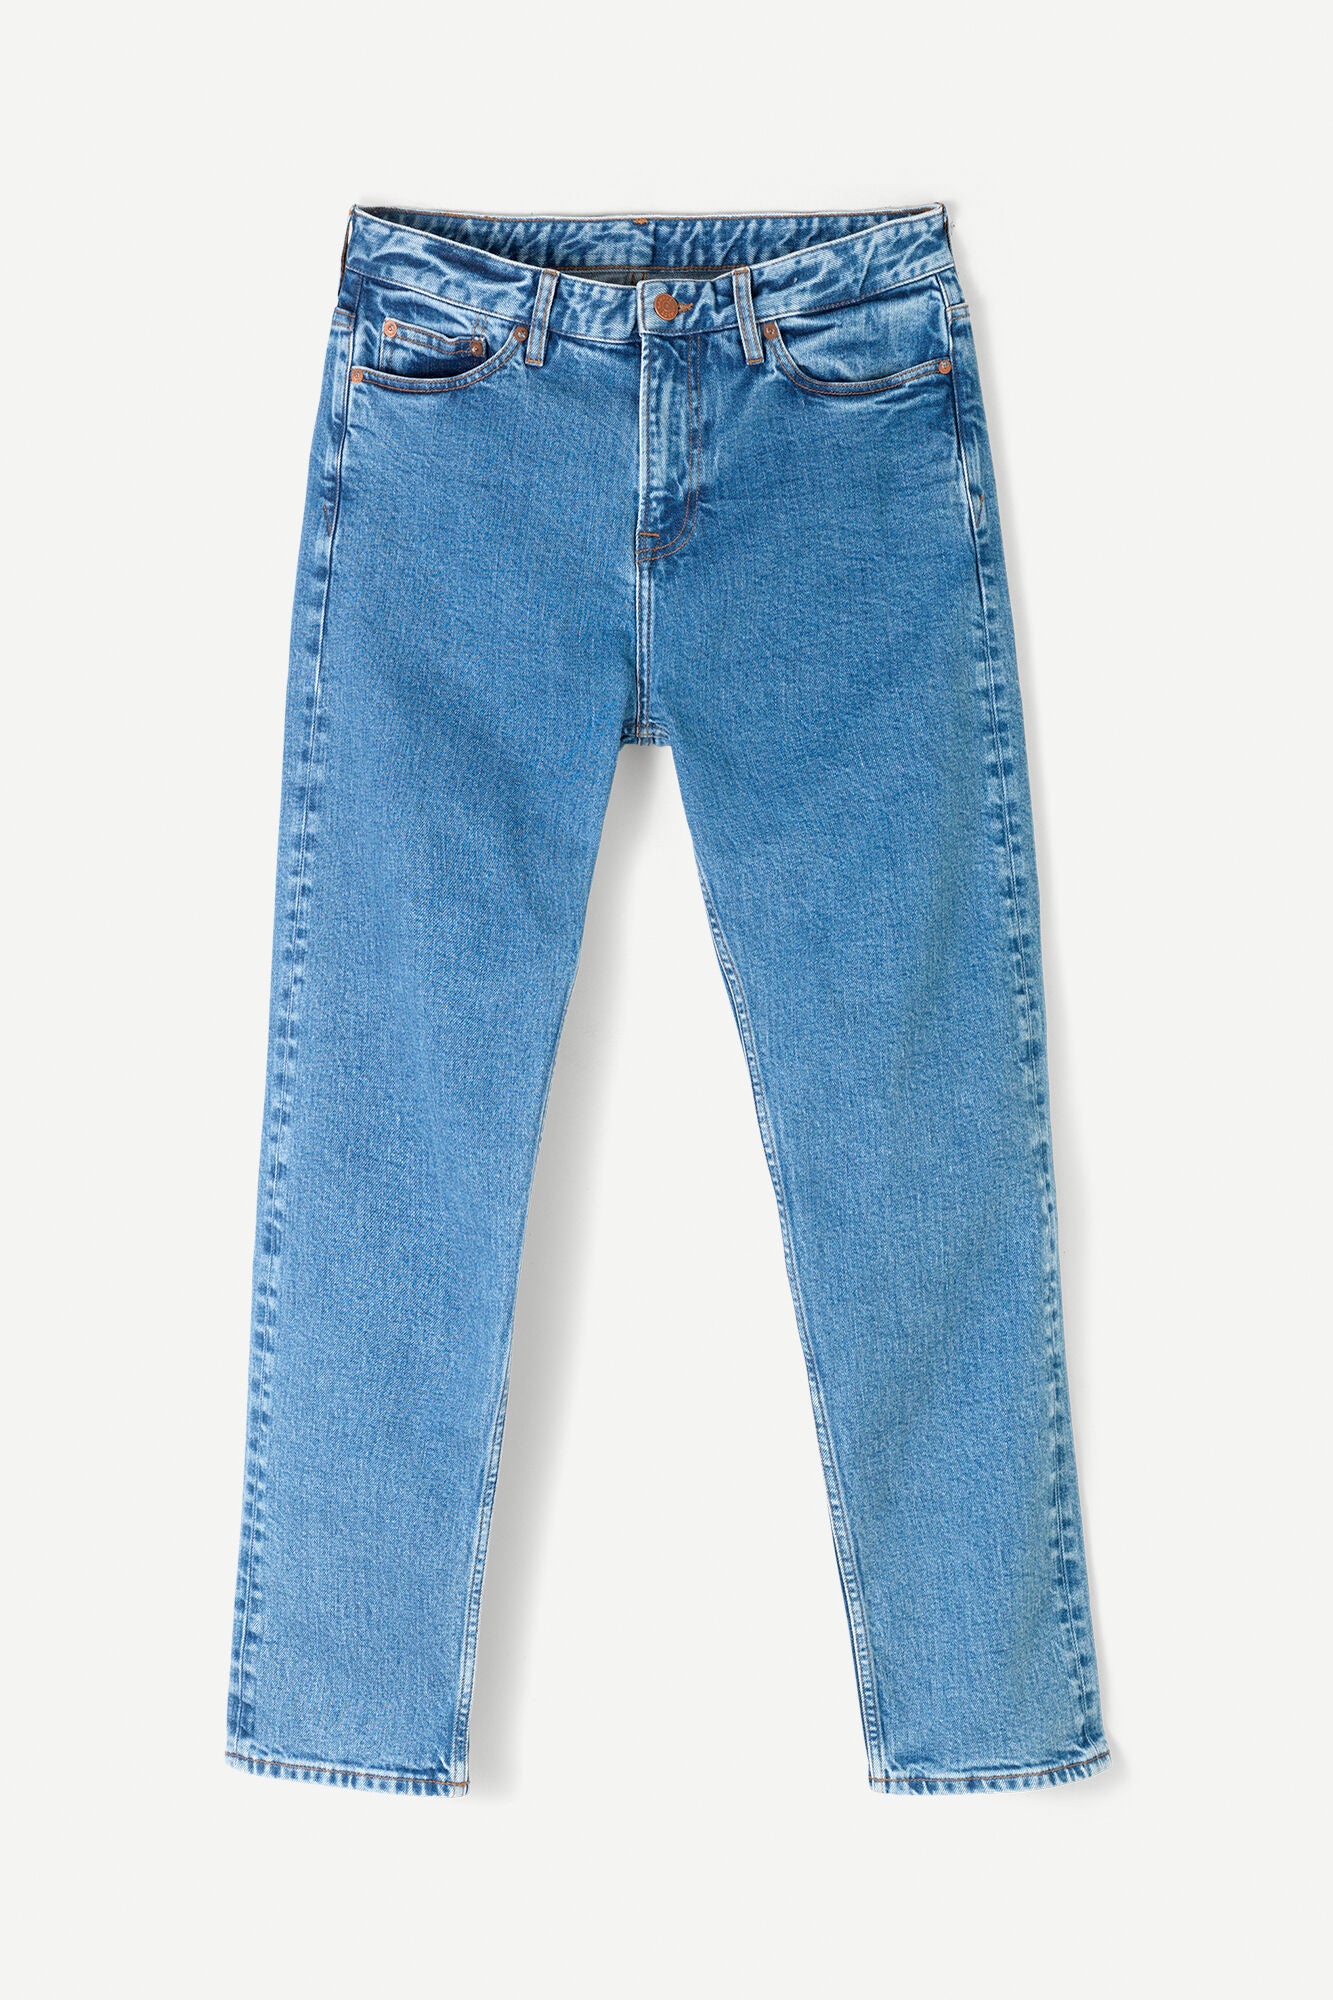 COSMO 11354 JEANS